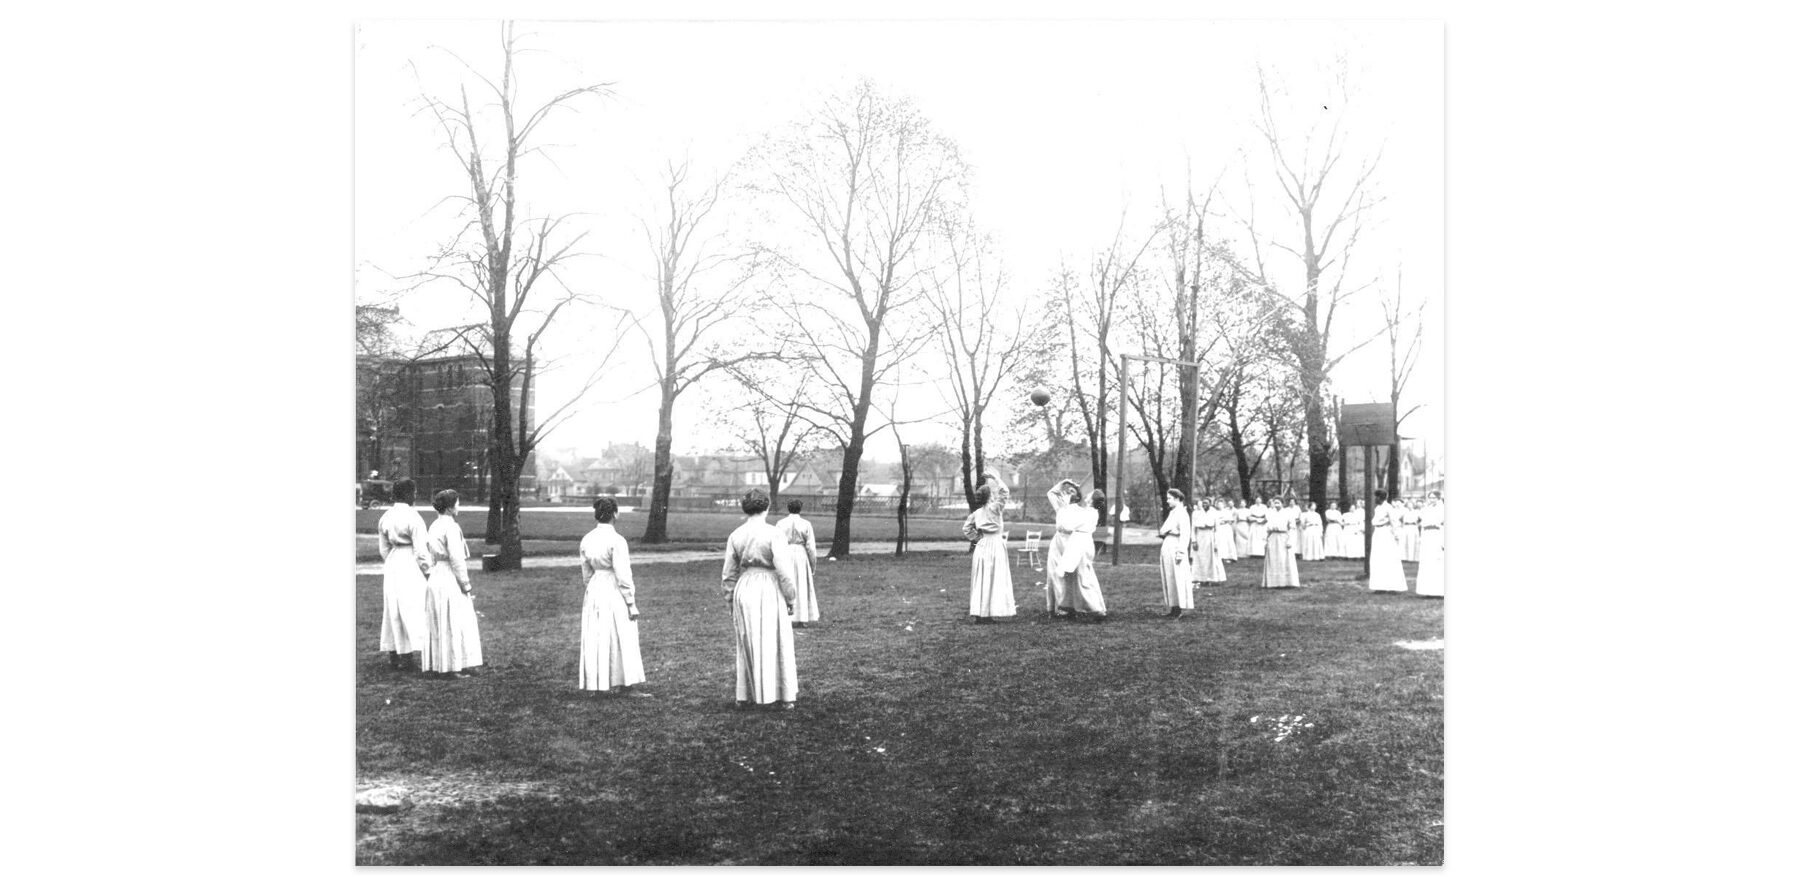 An archival photo of women prison playing a game in the prison yard.